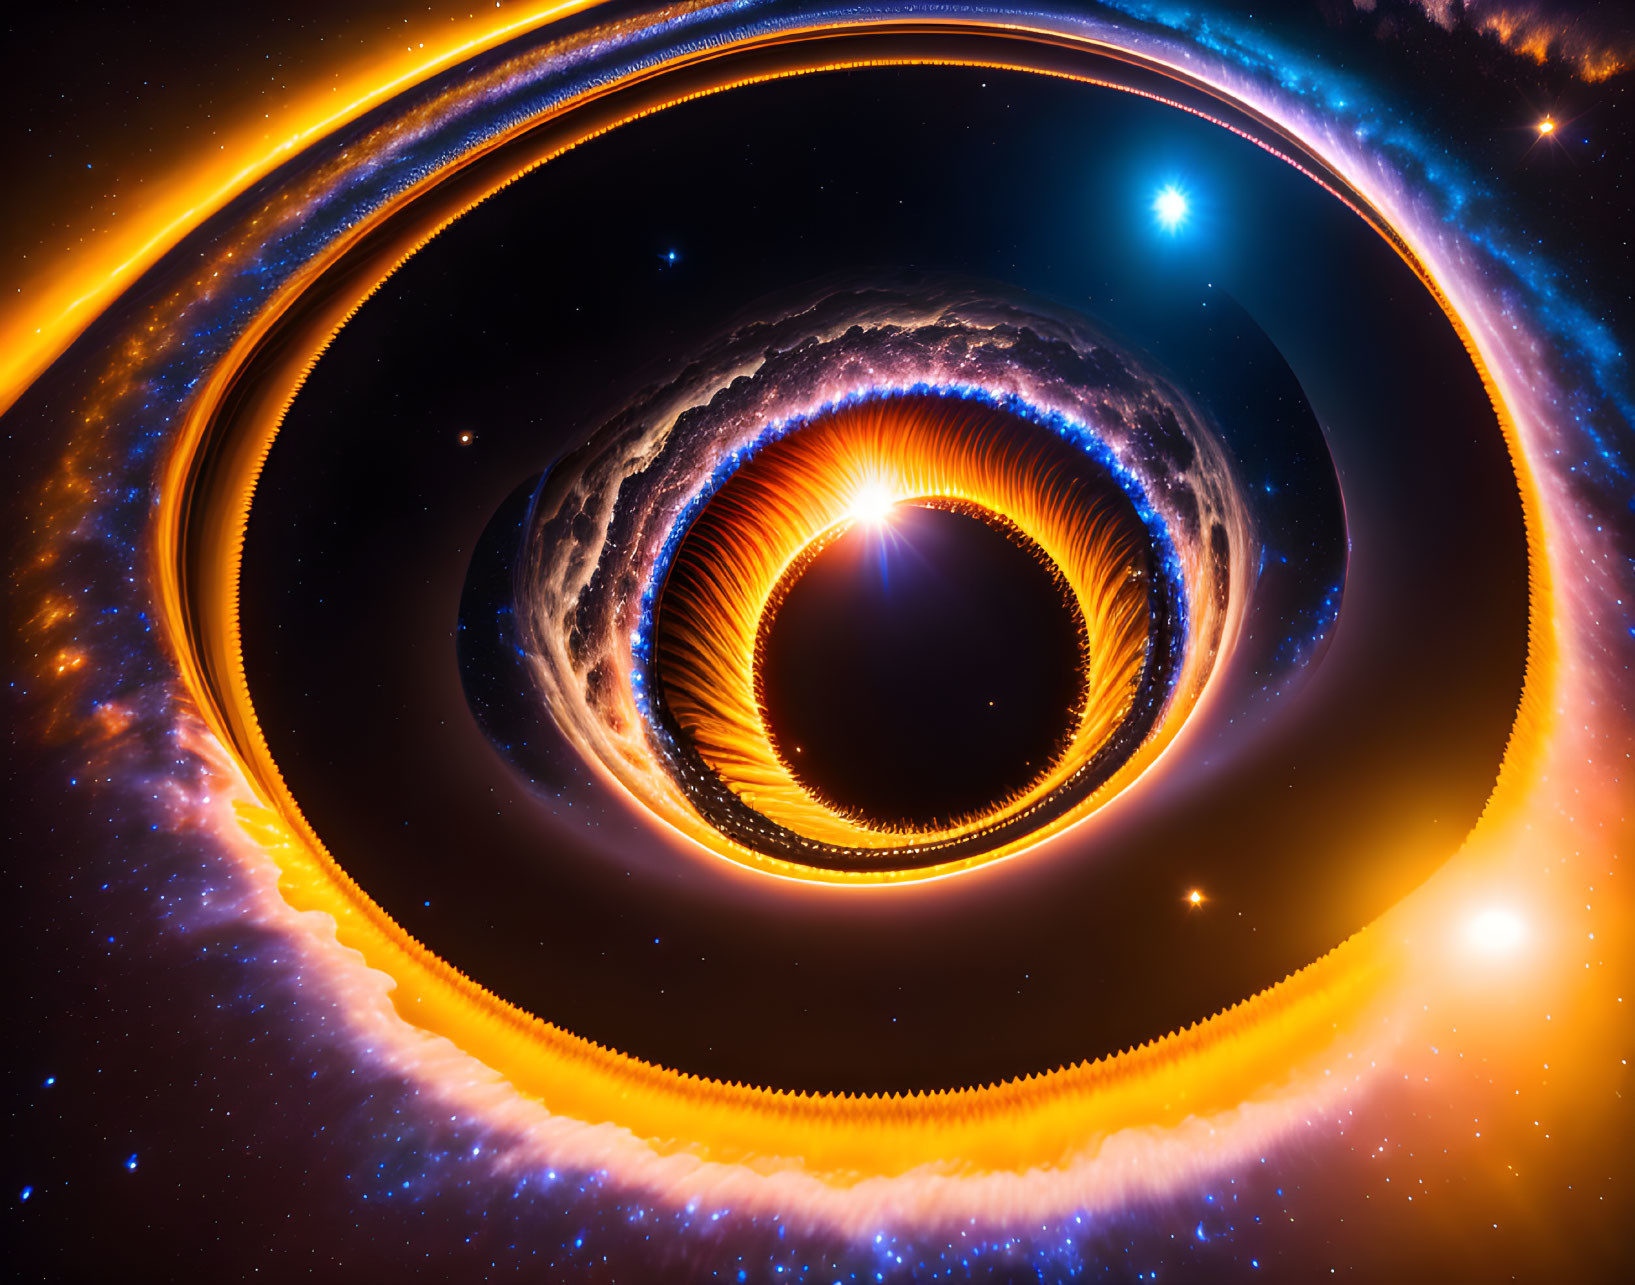 Digital art: Black hole with glowing accretion disks and celestial bodies